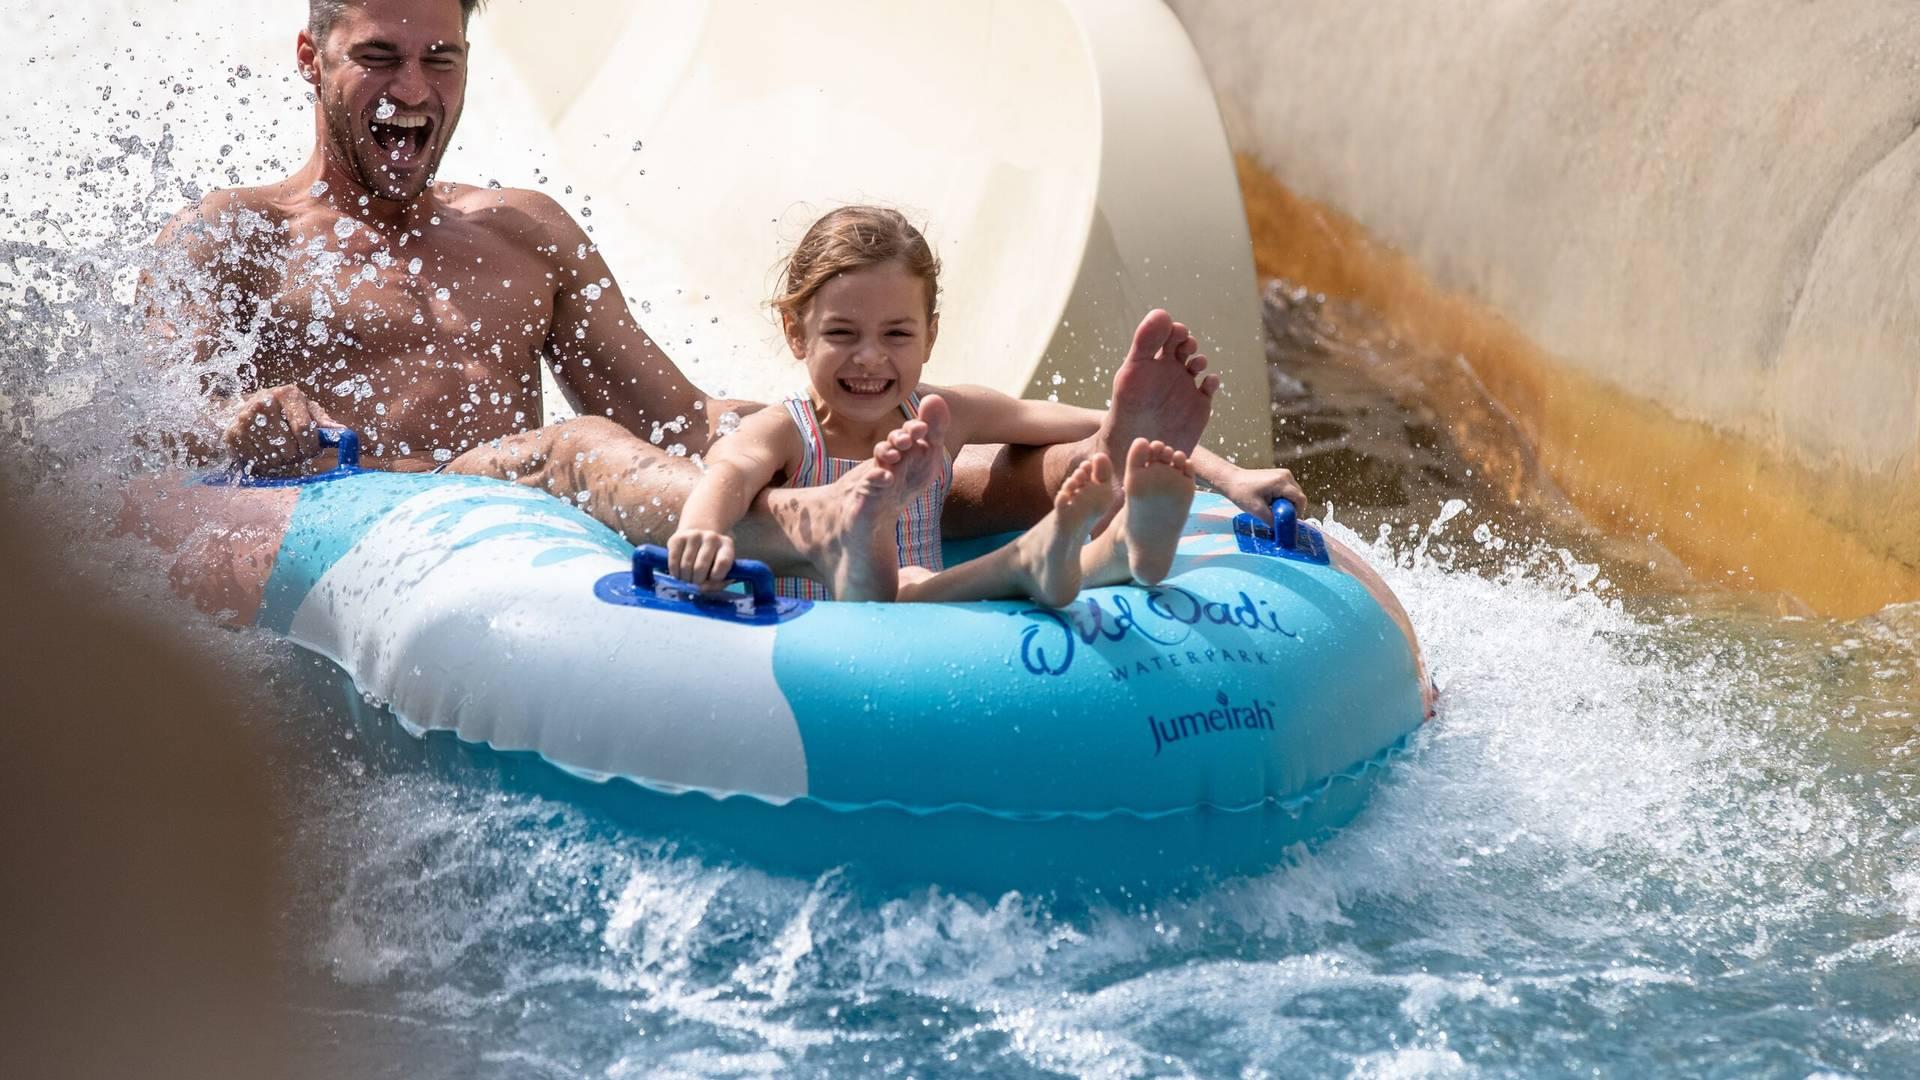 What to expect from wild wadi fast track tickets